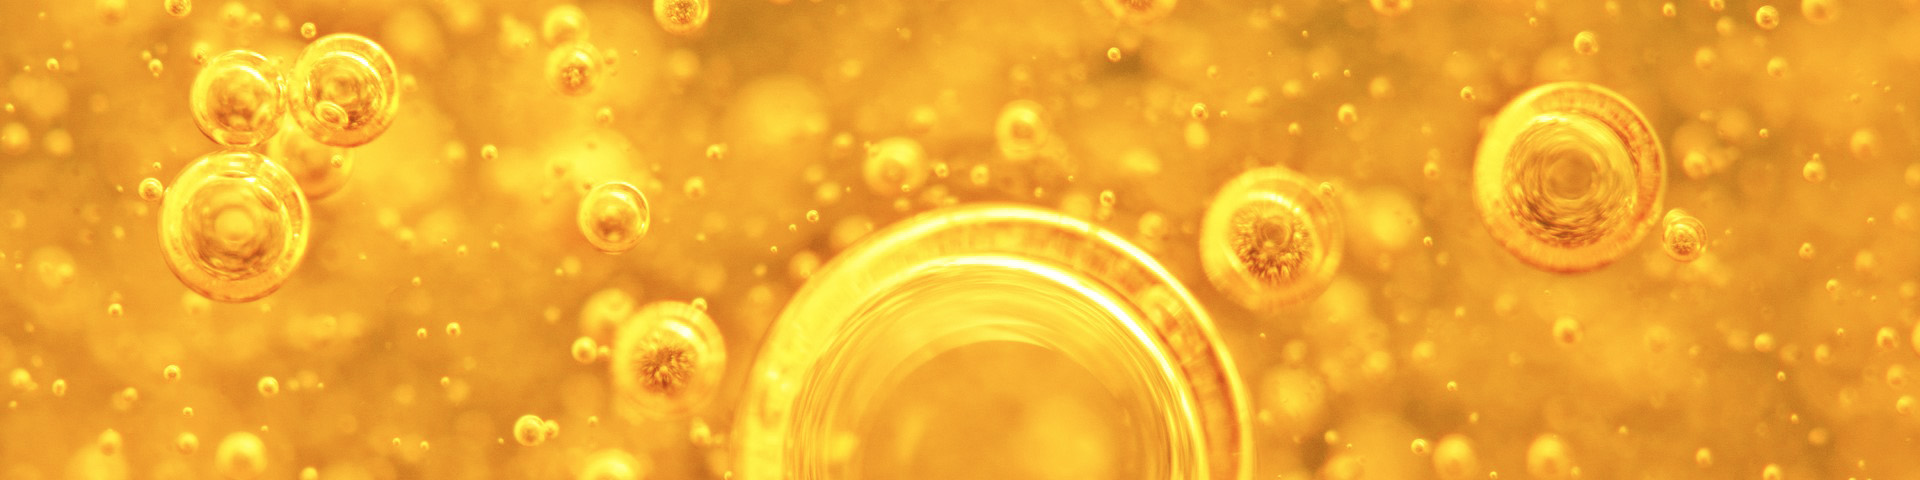 Yellow oil with bubbles 